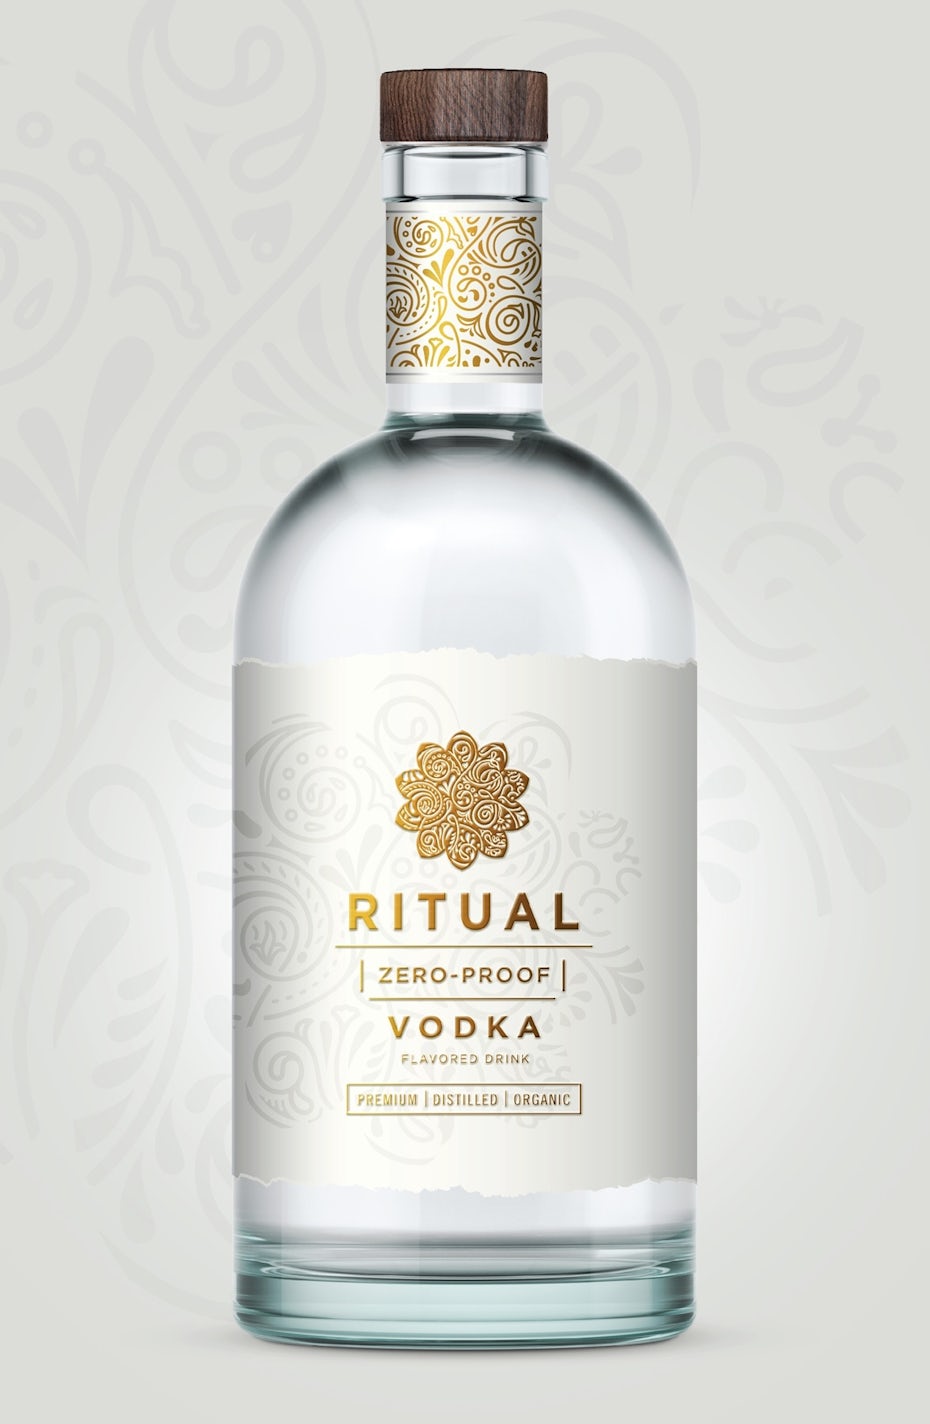 Clear bottle with a white label displaying a geometric gold logo